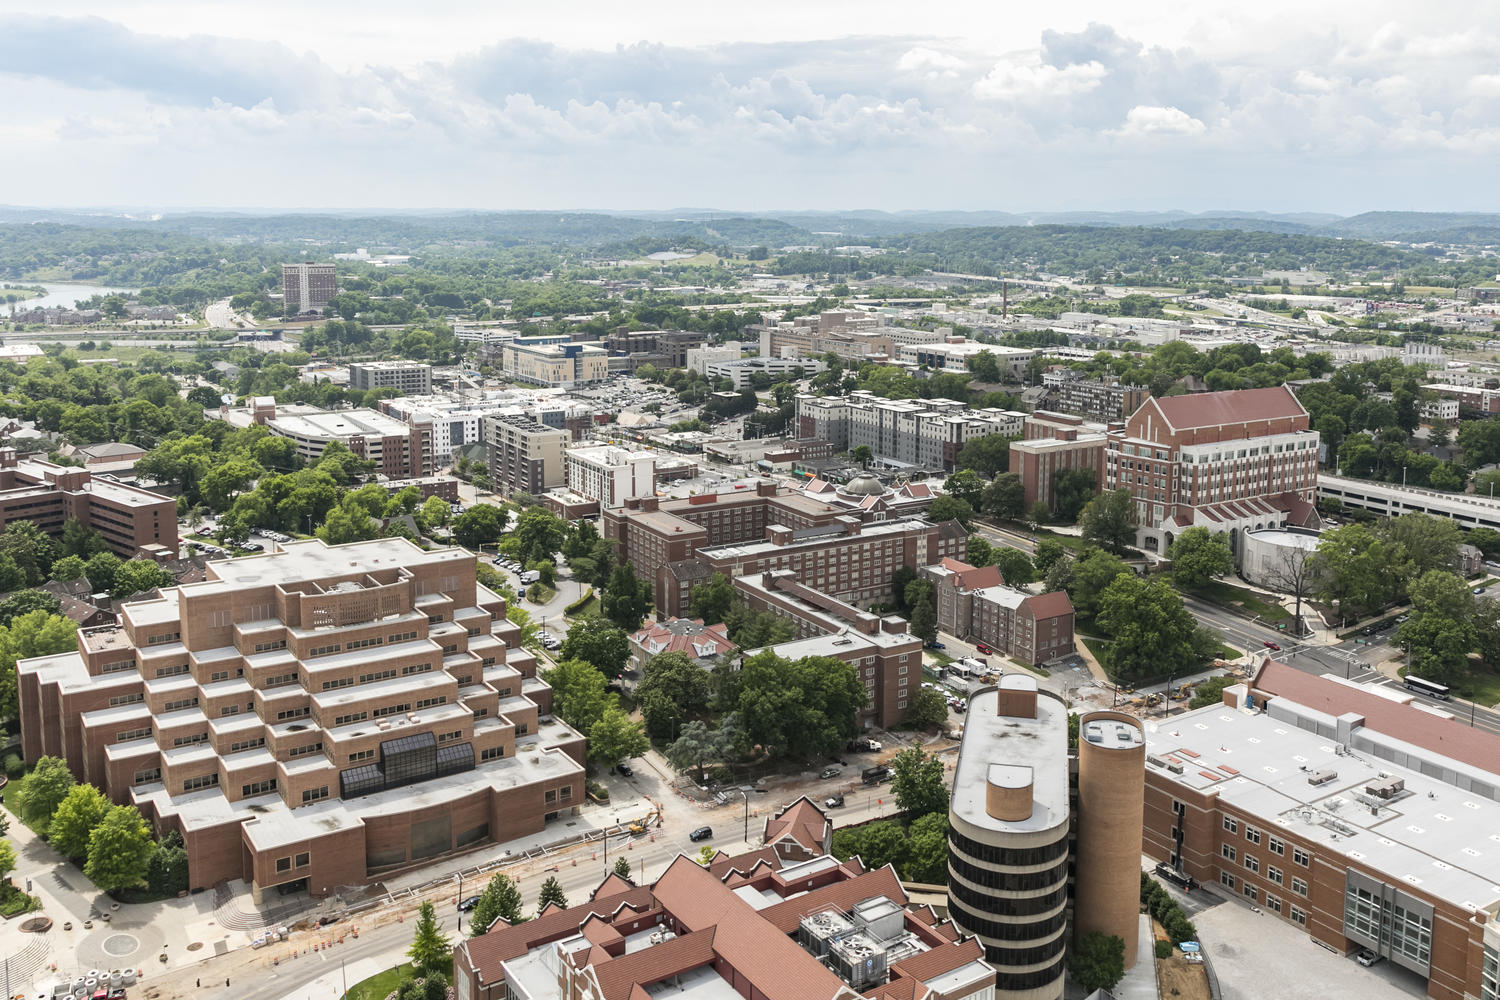 ut-knoxville-will-have-no-tuition-increase-for-fy-18-19-budget-news